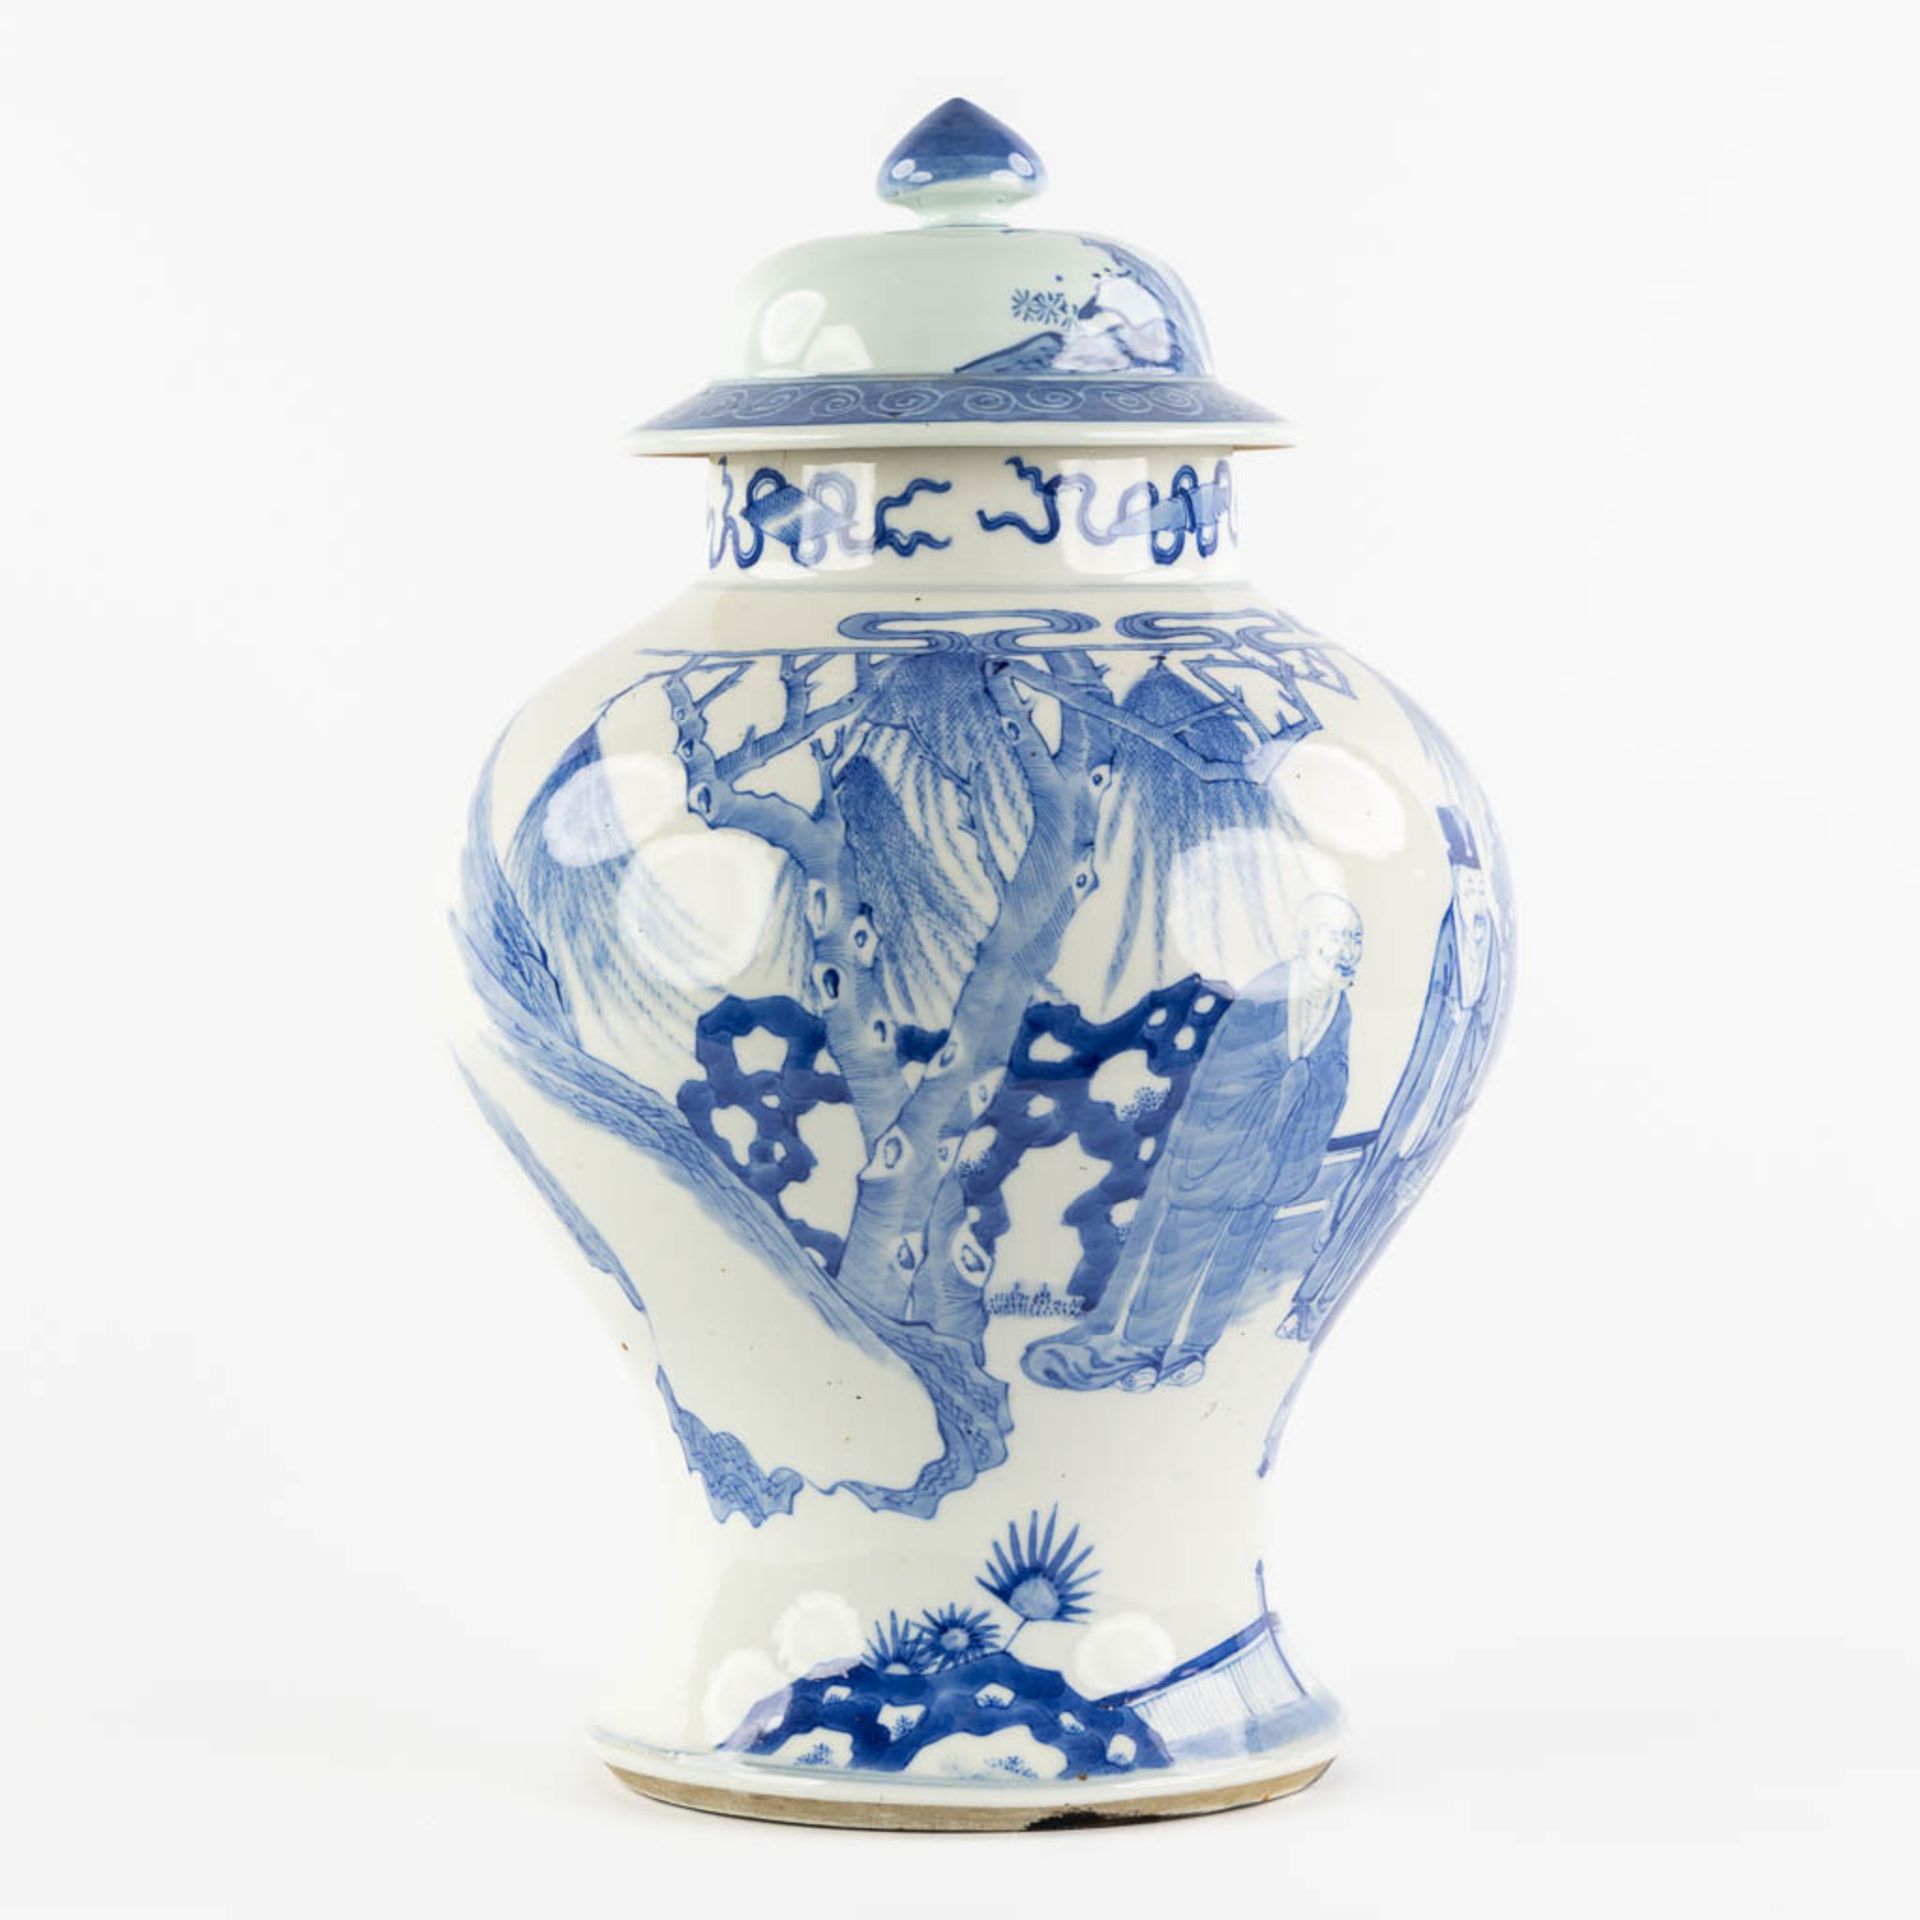 A Chinese 'Baluster' vase, blue-white decor of 'Wise Men'. (H:43 x D:29 cm) - Image 3 of 12